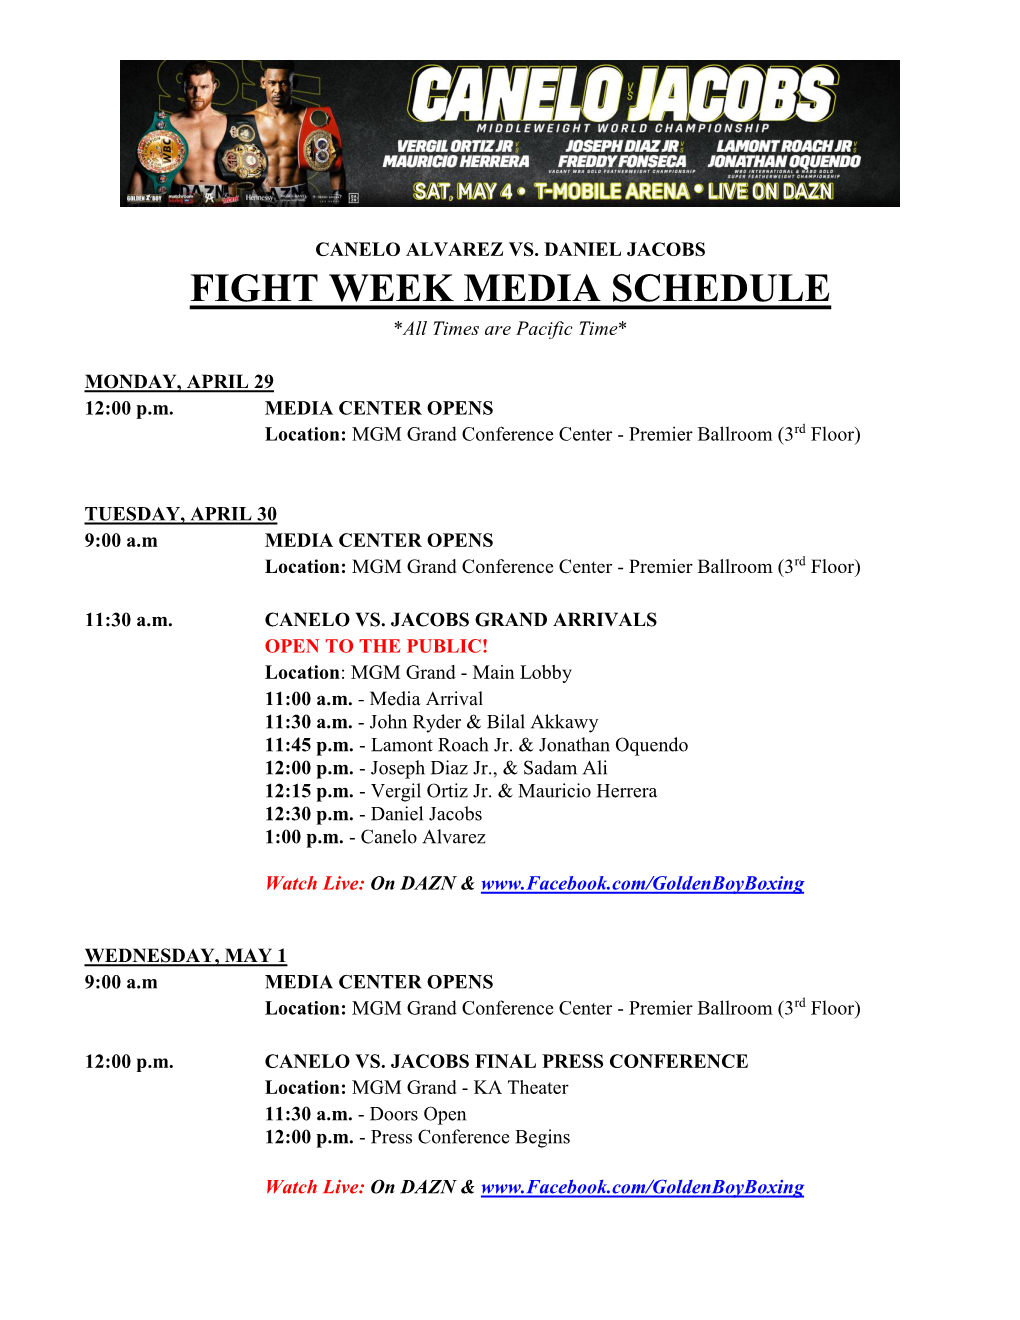 FIGHT WEEK MEDIA SCHEDULE *All Times Are Pacific Time*